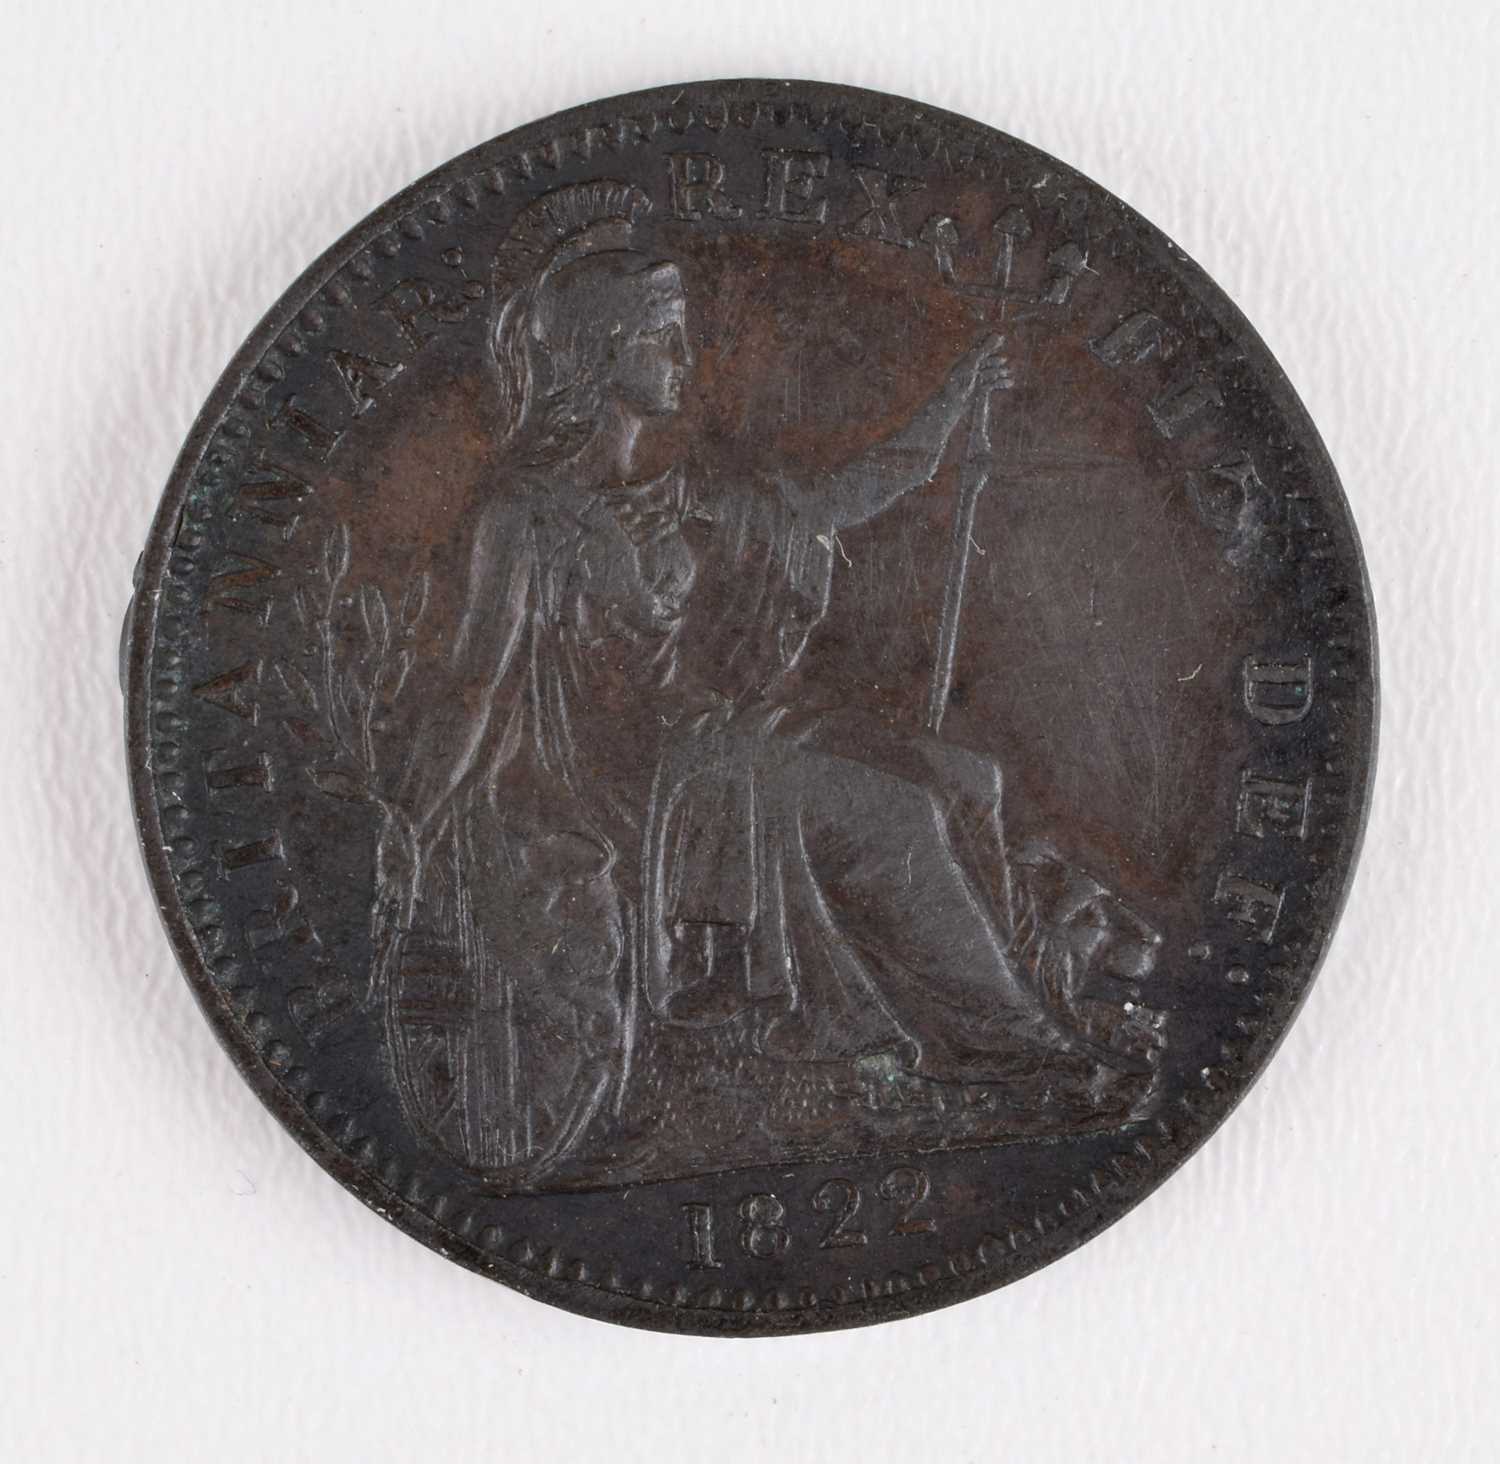 One album of historical British coinage dating from William and Mary through to George V. - Image 8 of 22